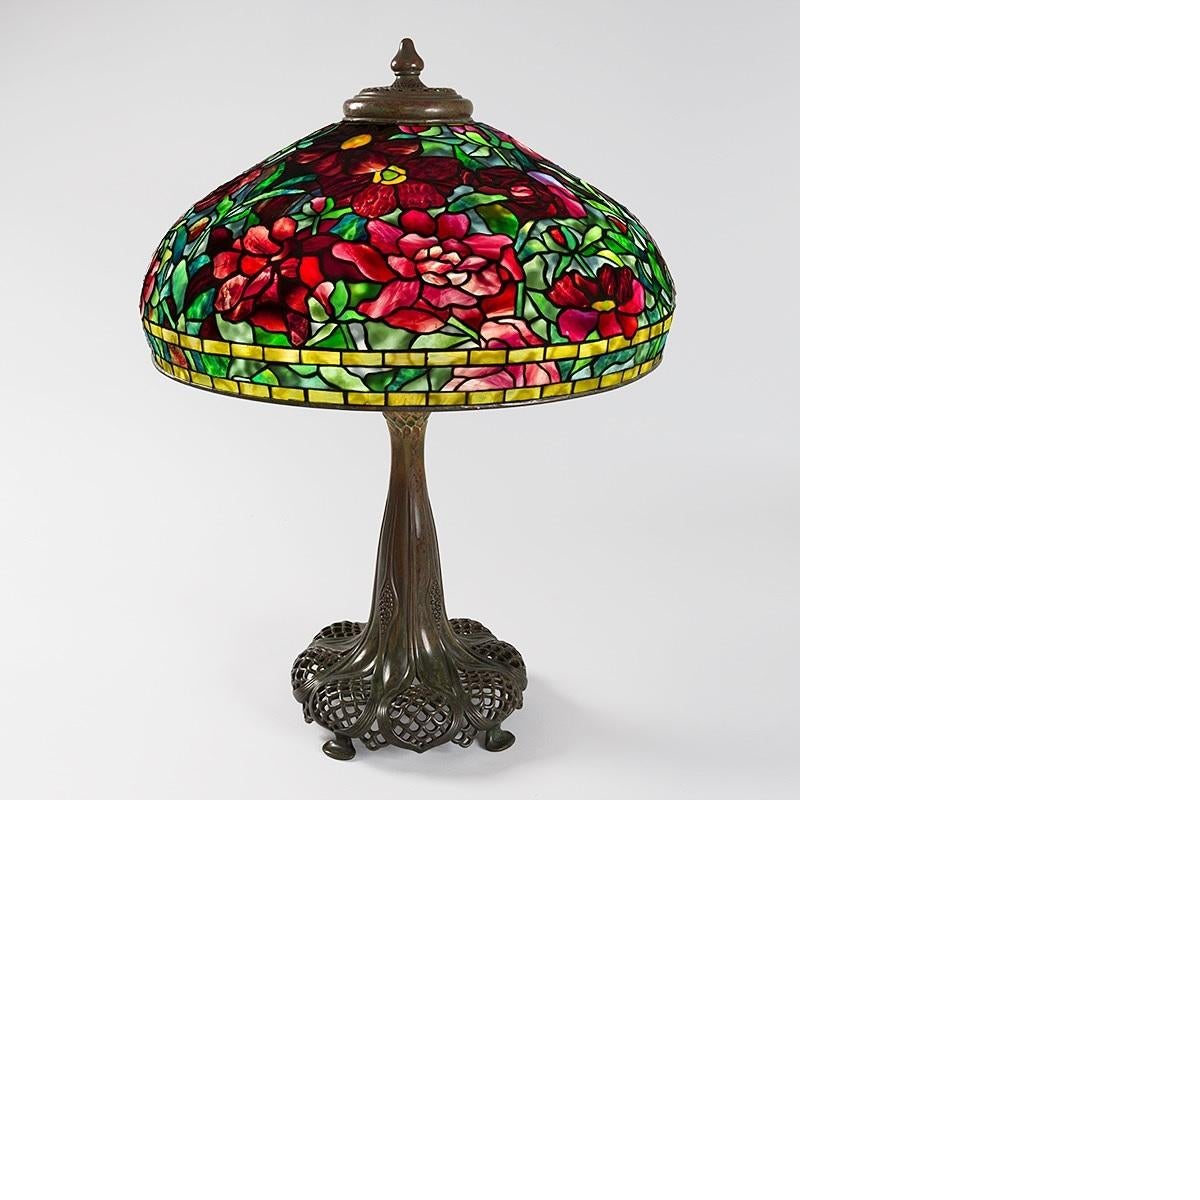 A Tiffany Studios New York “Peony” table lamp. The shade features three different peony cultivars from Tiffany’s garden at Laurelton Hall: the Greek Peony (Paeonia parnassica), Cup of Shining Night, and Shima Nishiki. This “Peony” lamp is an unusual